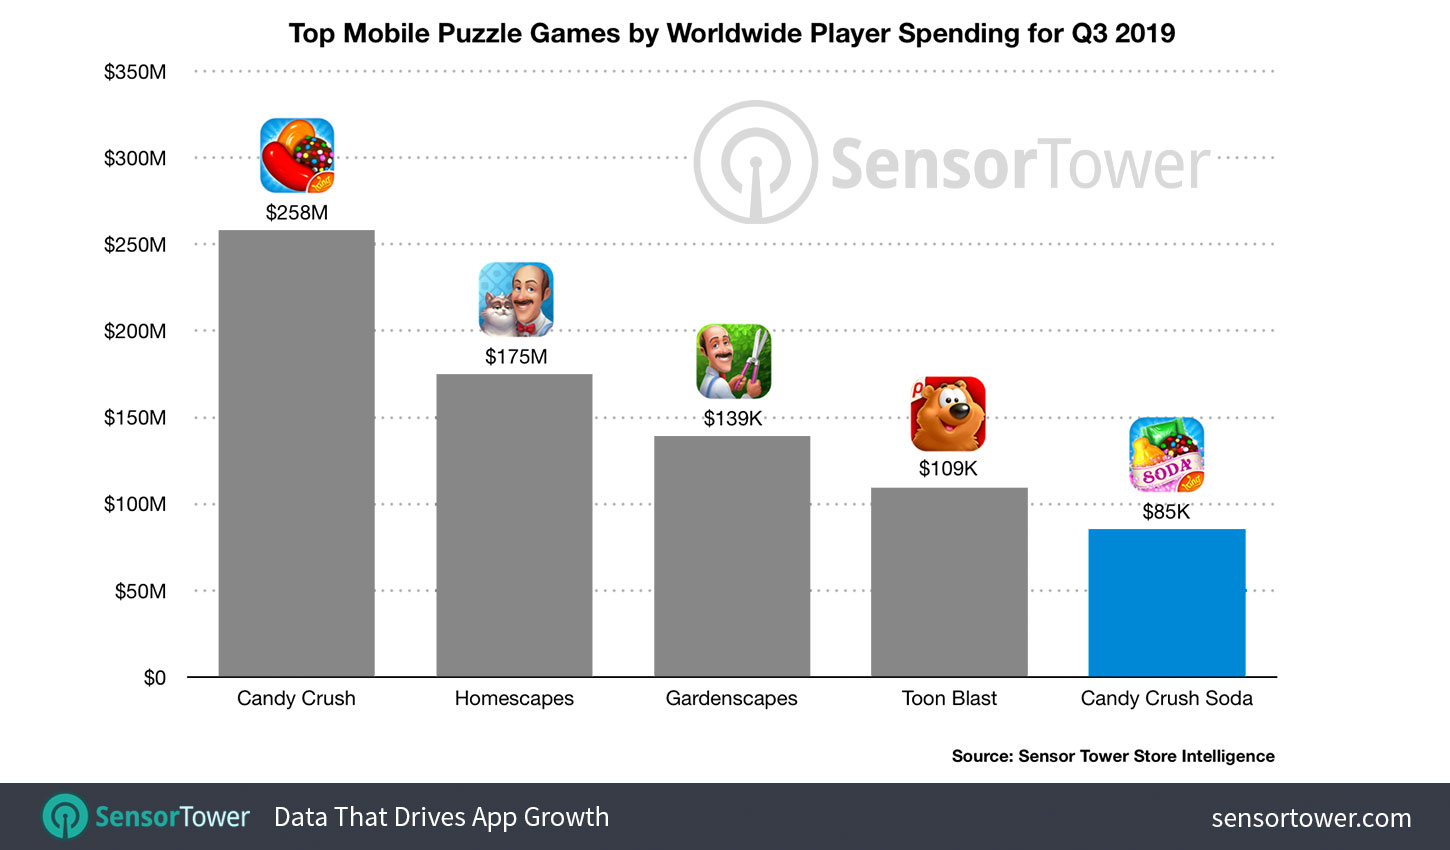 How Does Candy Crush Make Money?